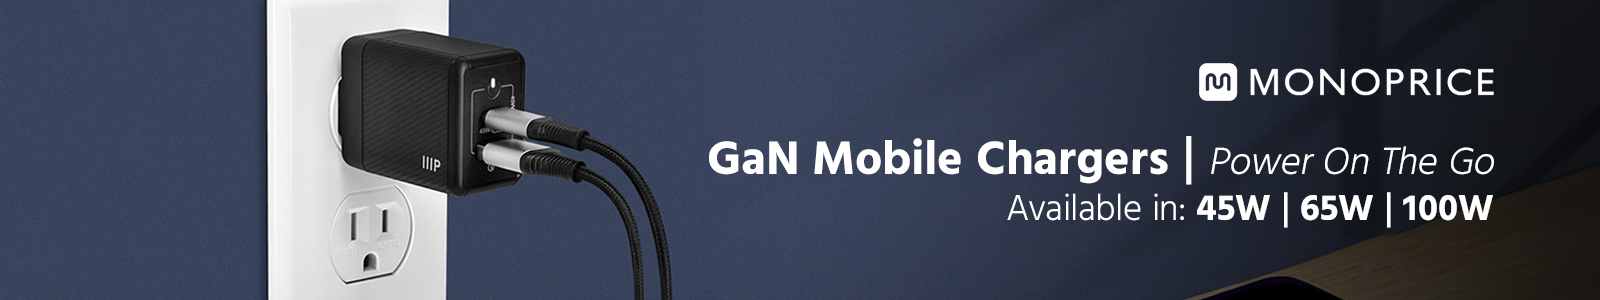 GaN Mobile Chargers
Power On The Go
Available in:
45W
65W
100W
Shop Now